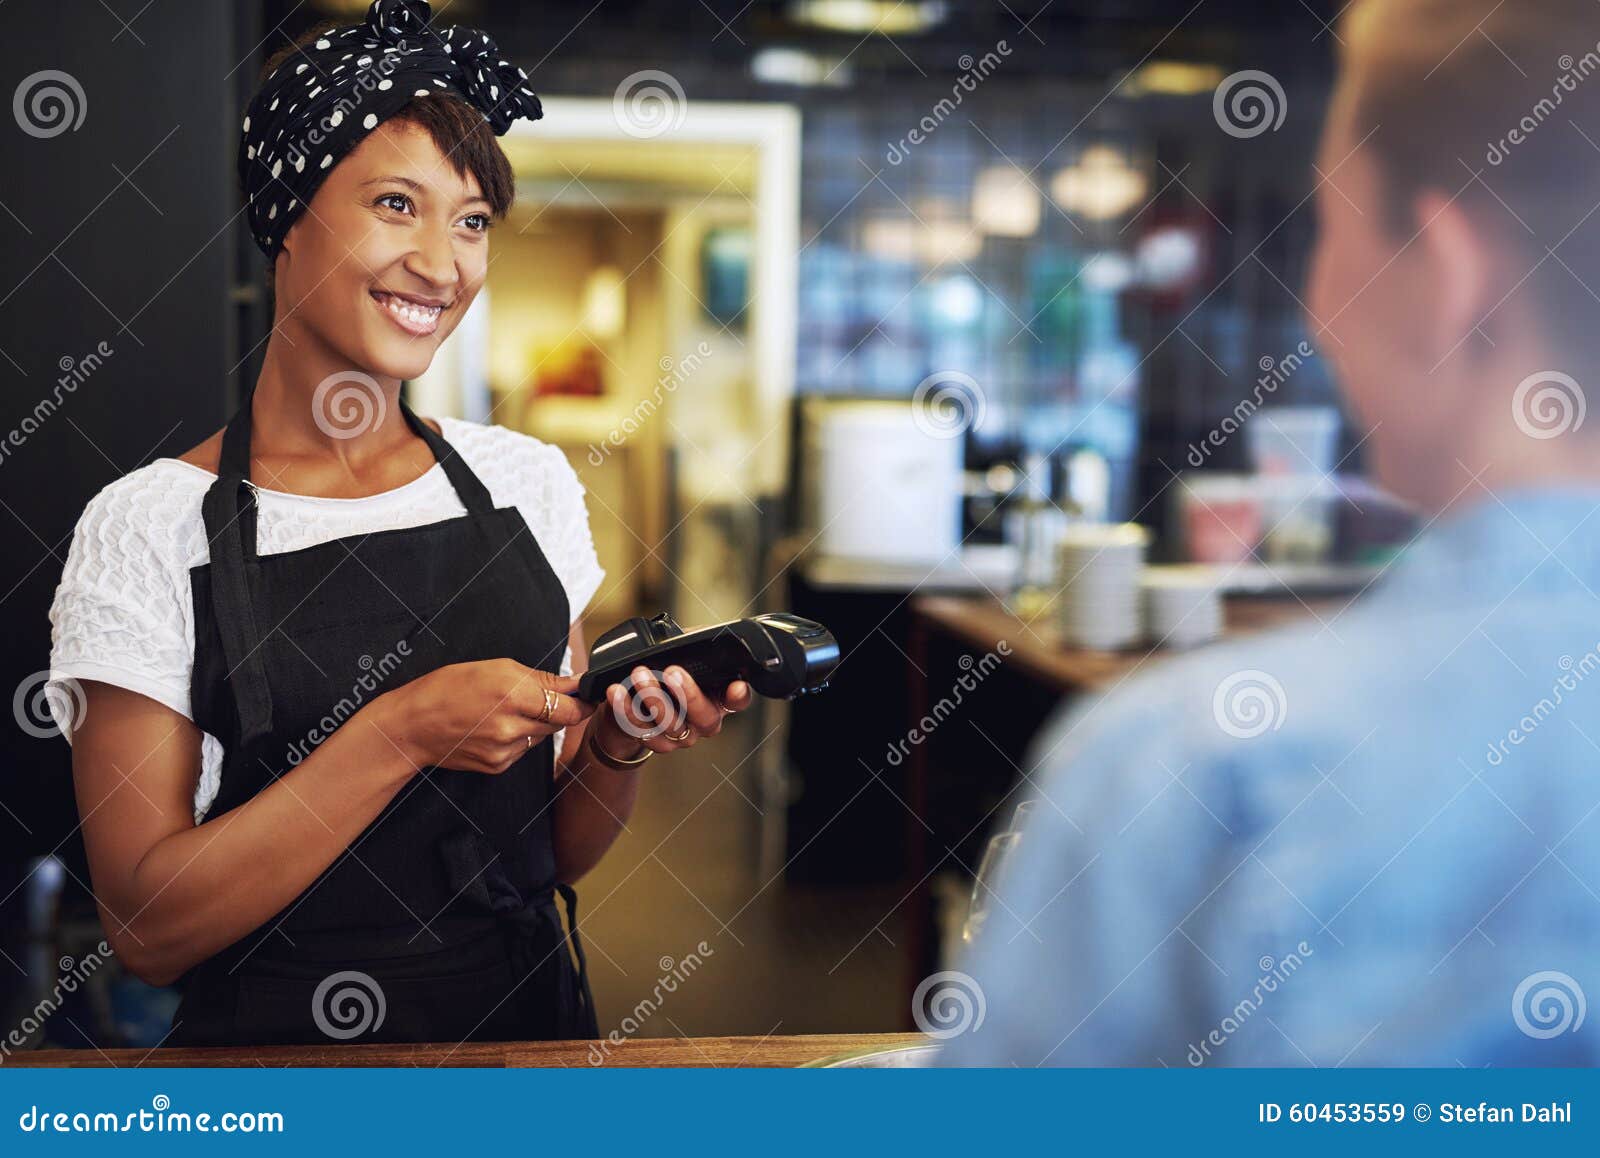 smiling small business owner taking payment